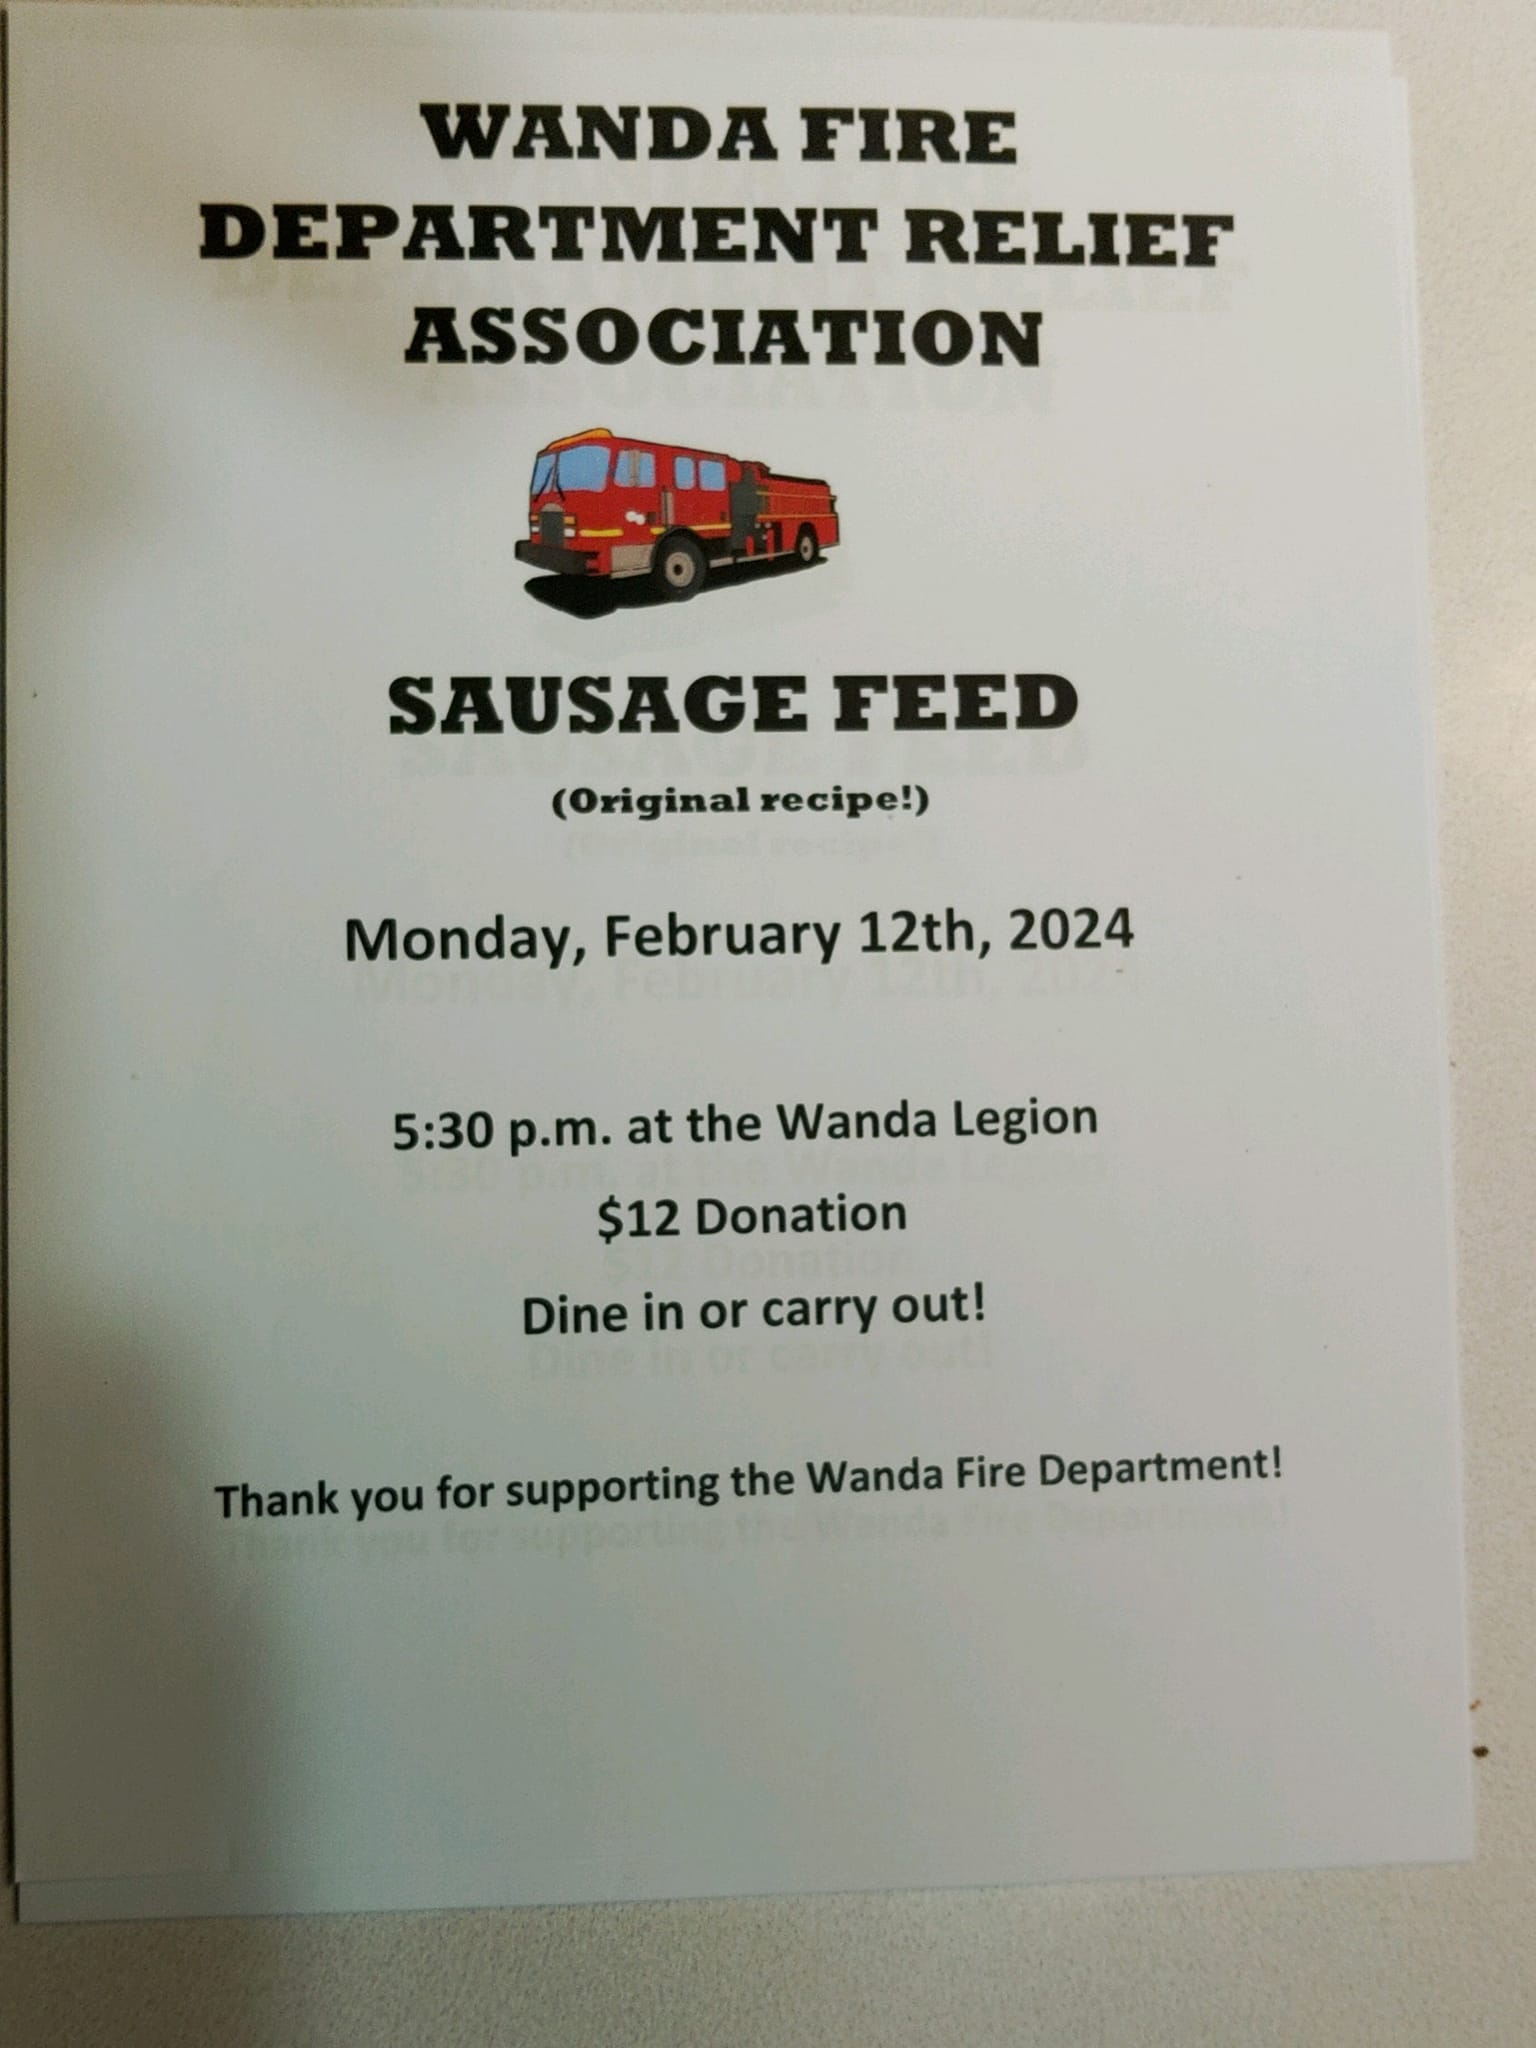 <h1 class="tribe-events-single-event-title">Wanda Fire Department Relief Association Sausage Feed</h1>